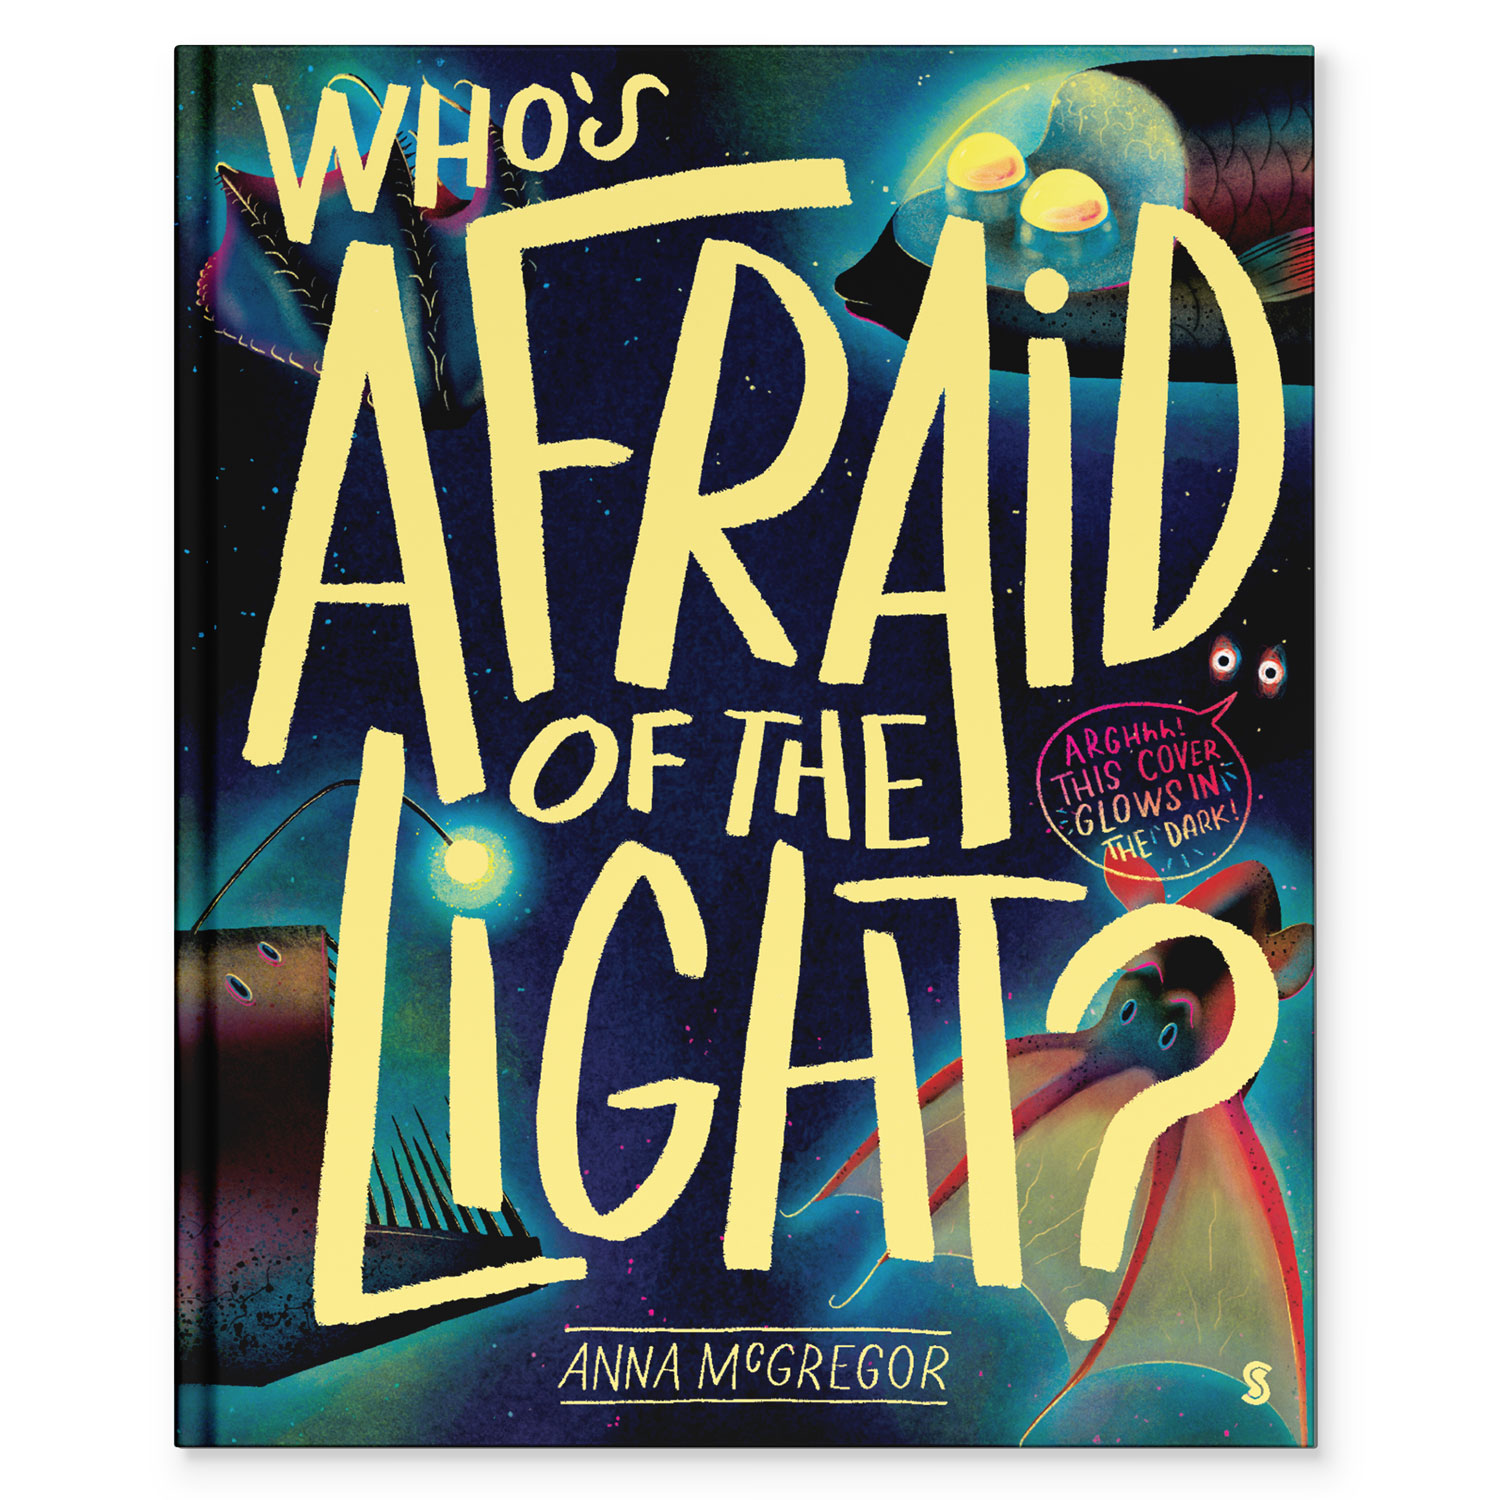 Who's Afraid of the Light? Book Cover